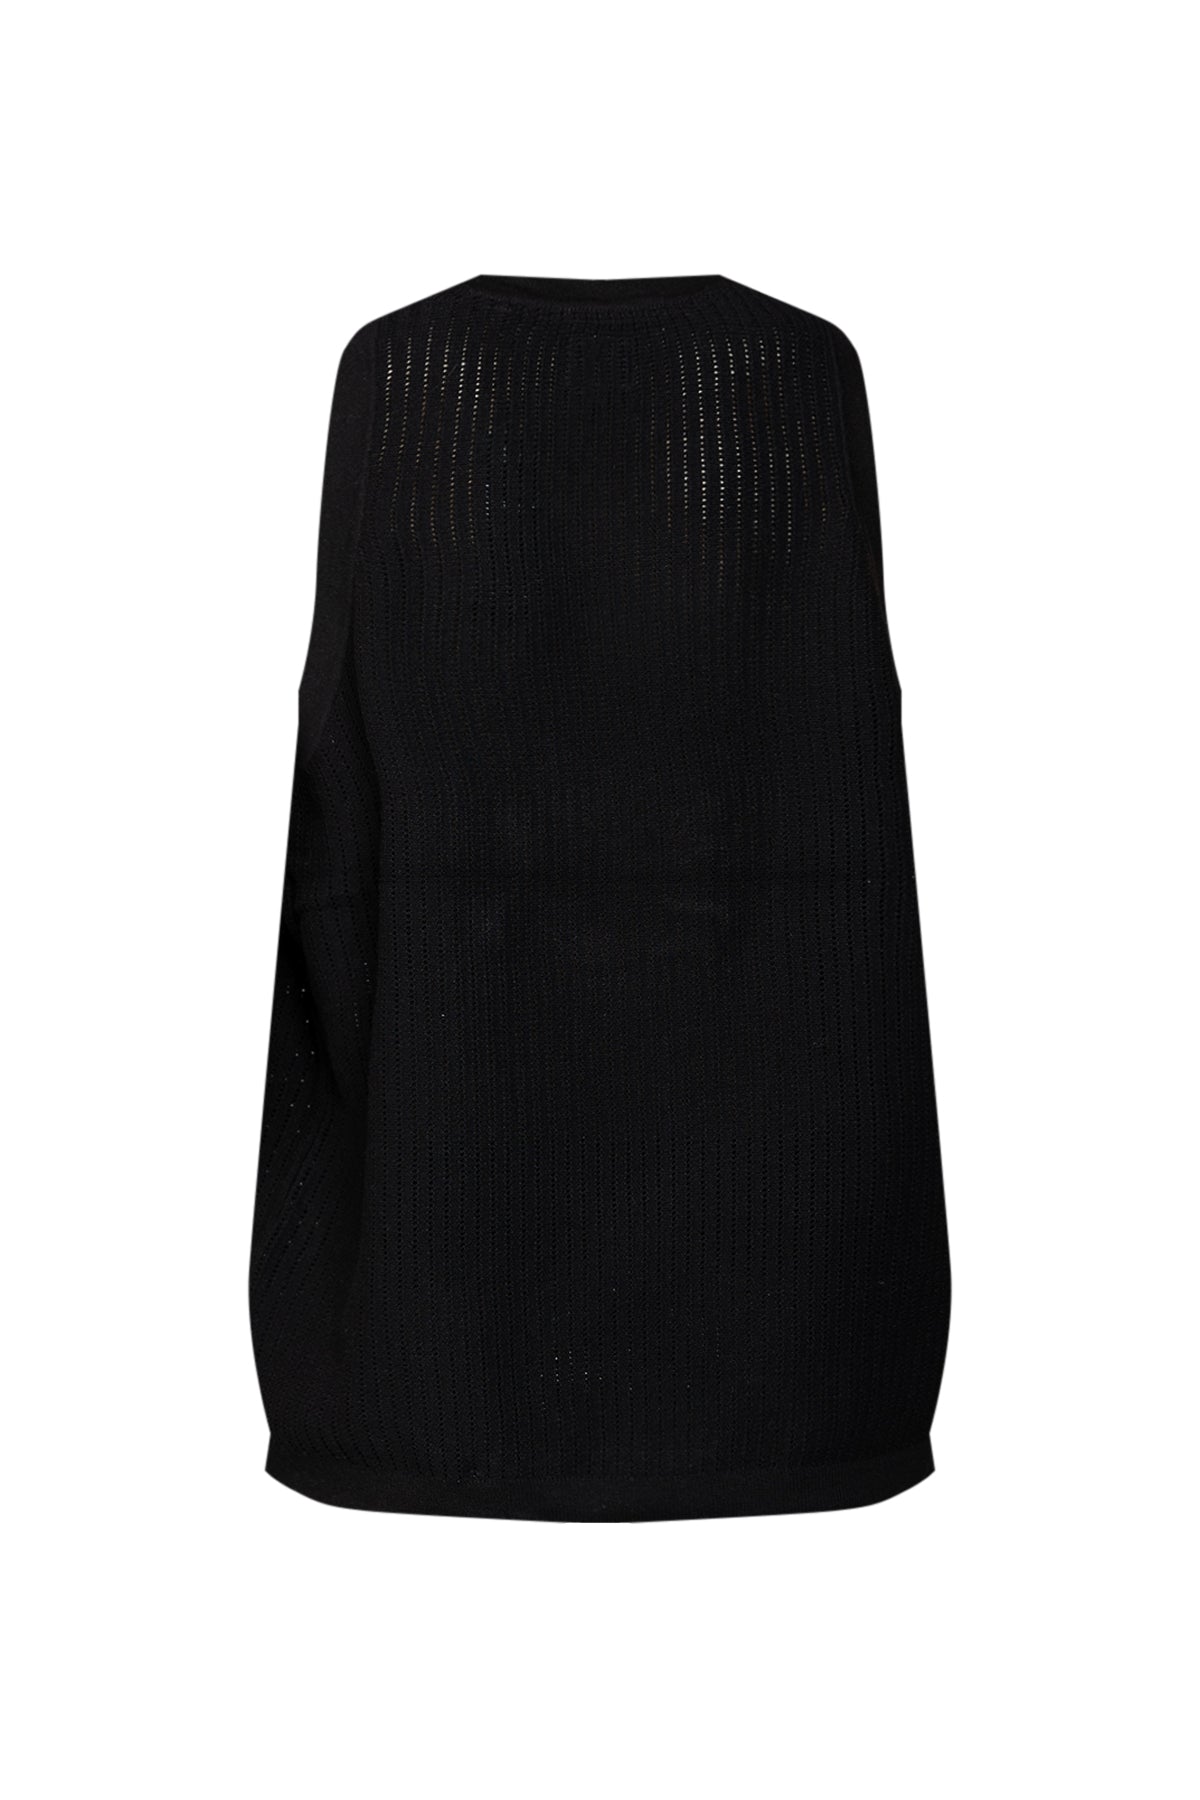 Perforated Muscle Shirt